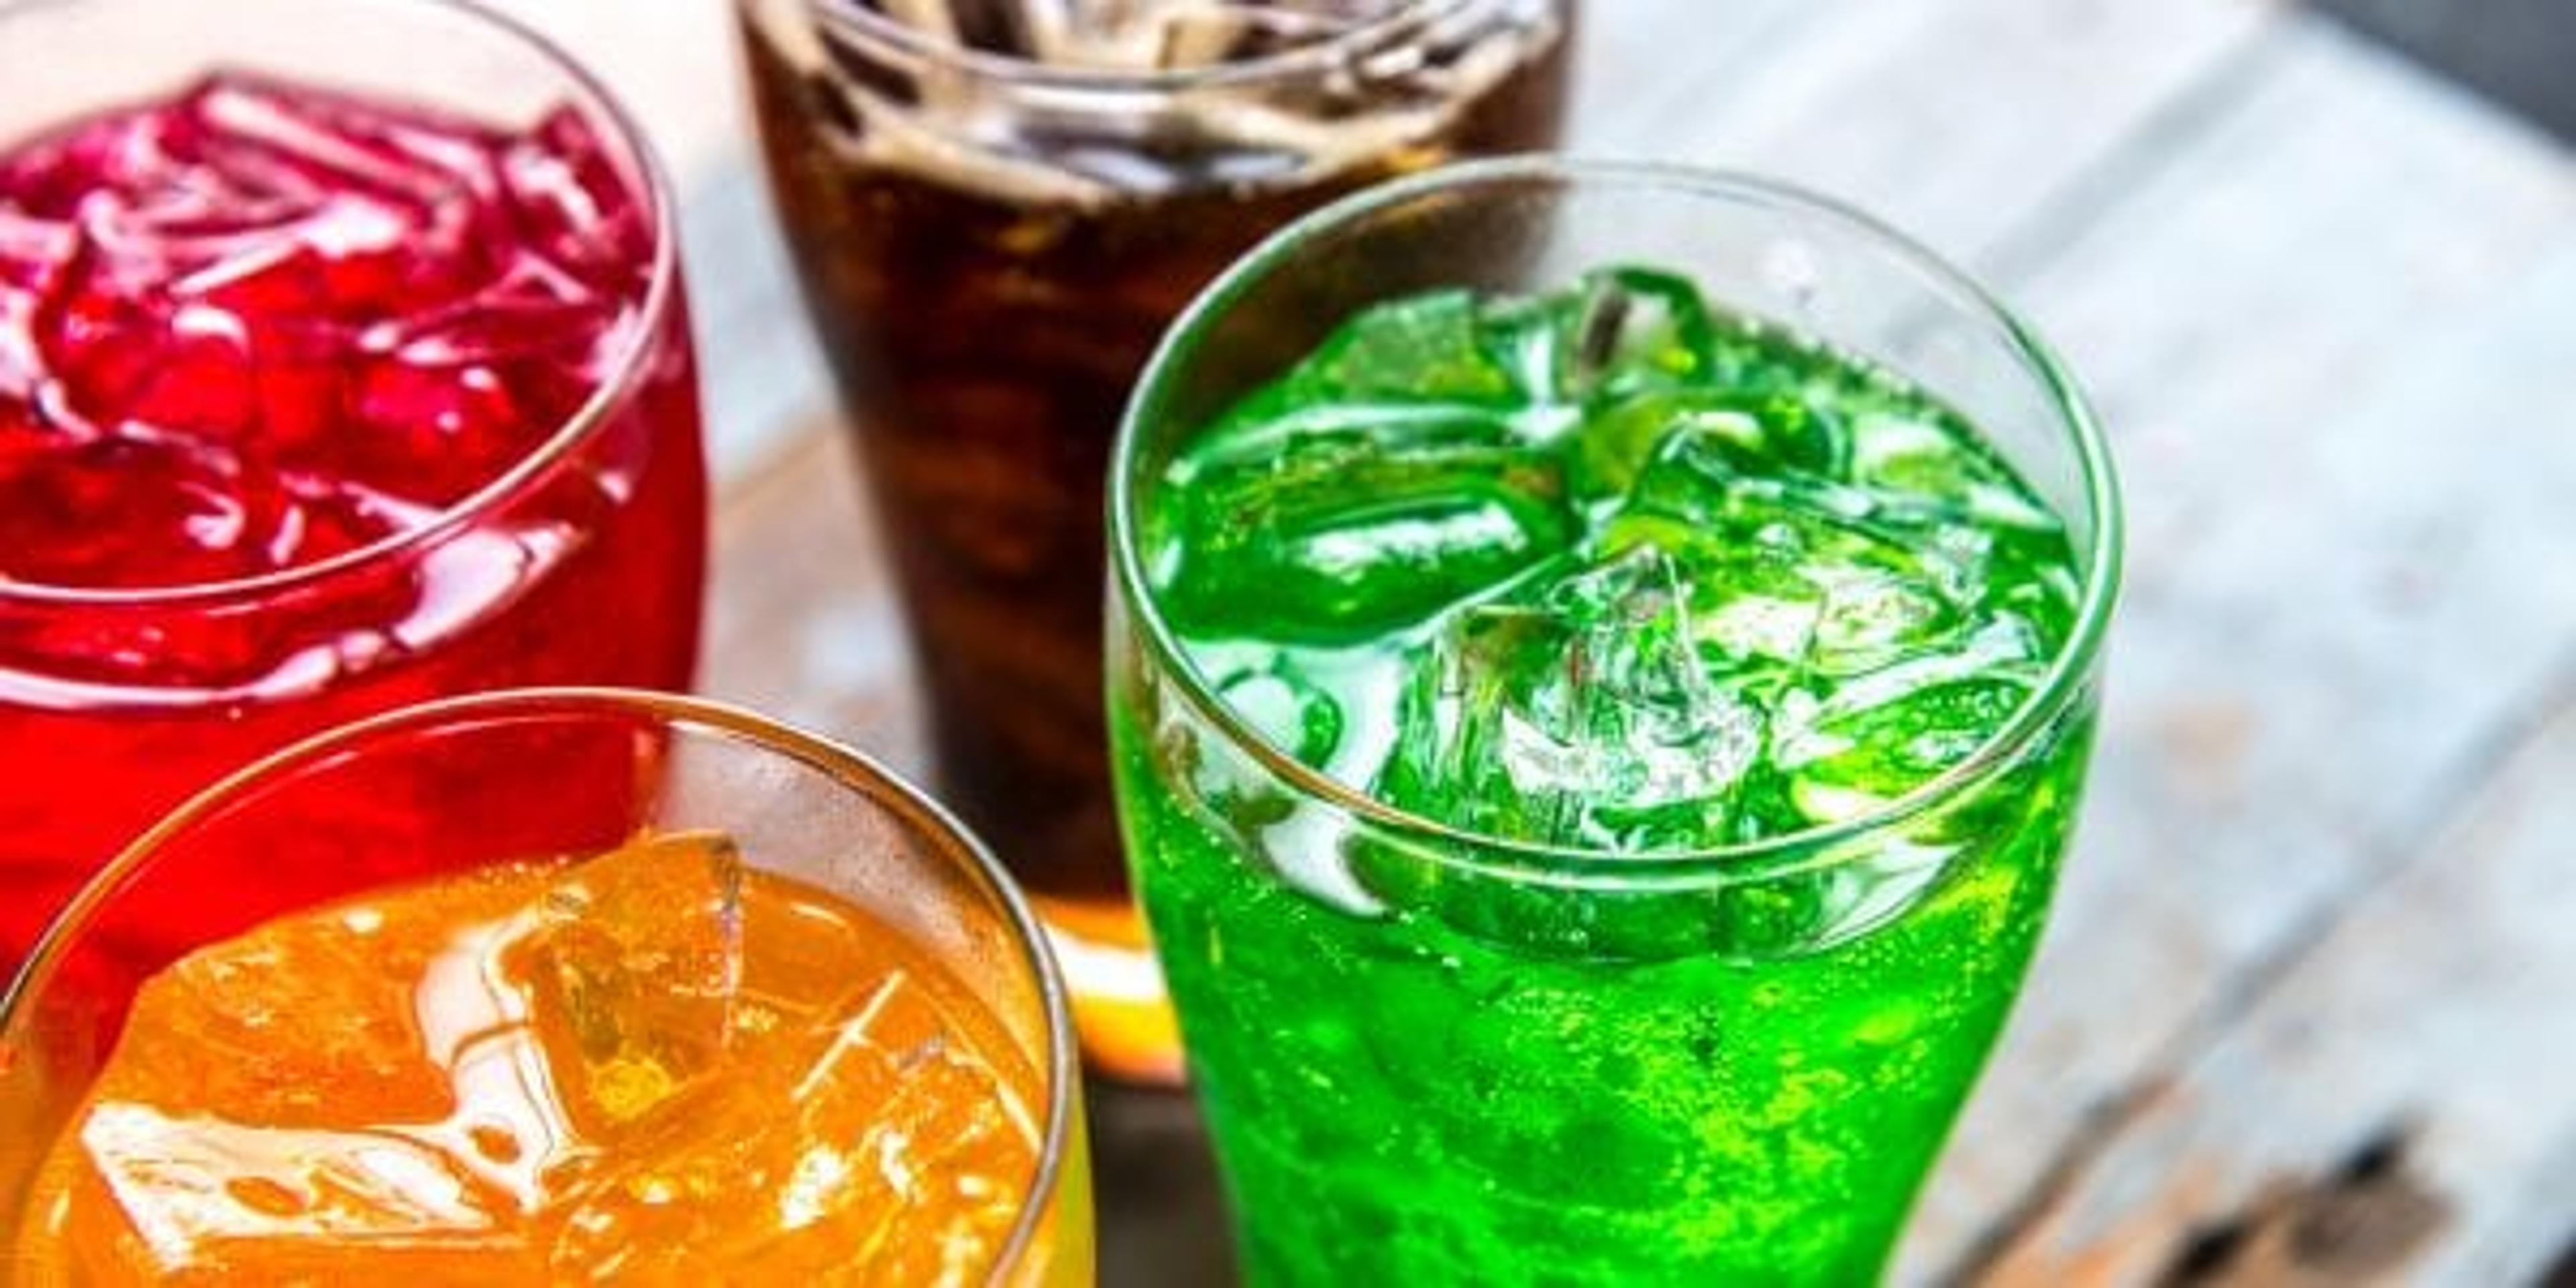 Red, orange, brown, and green drinks on a wooden surface